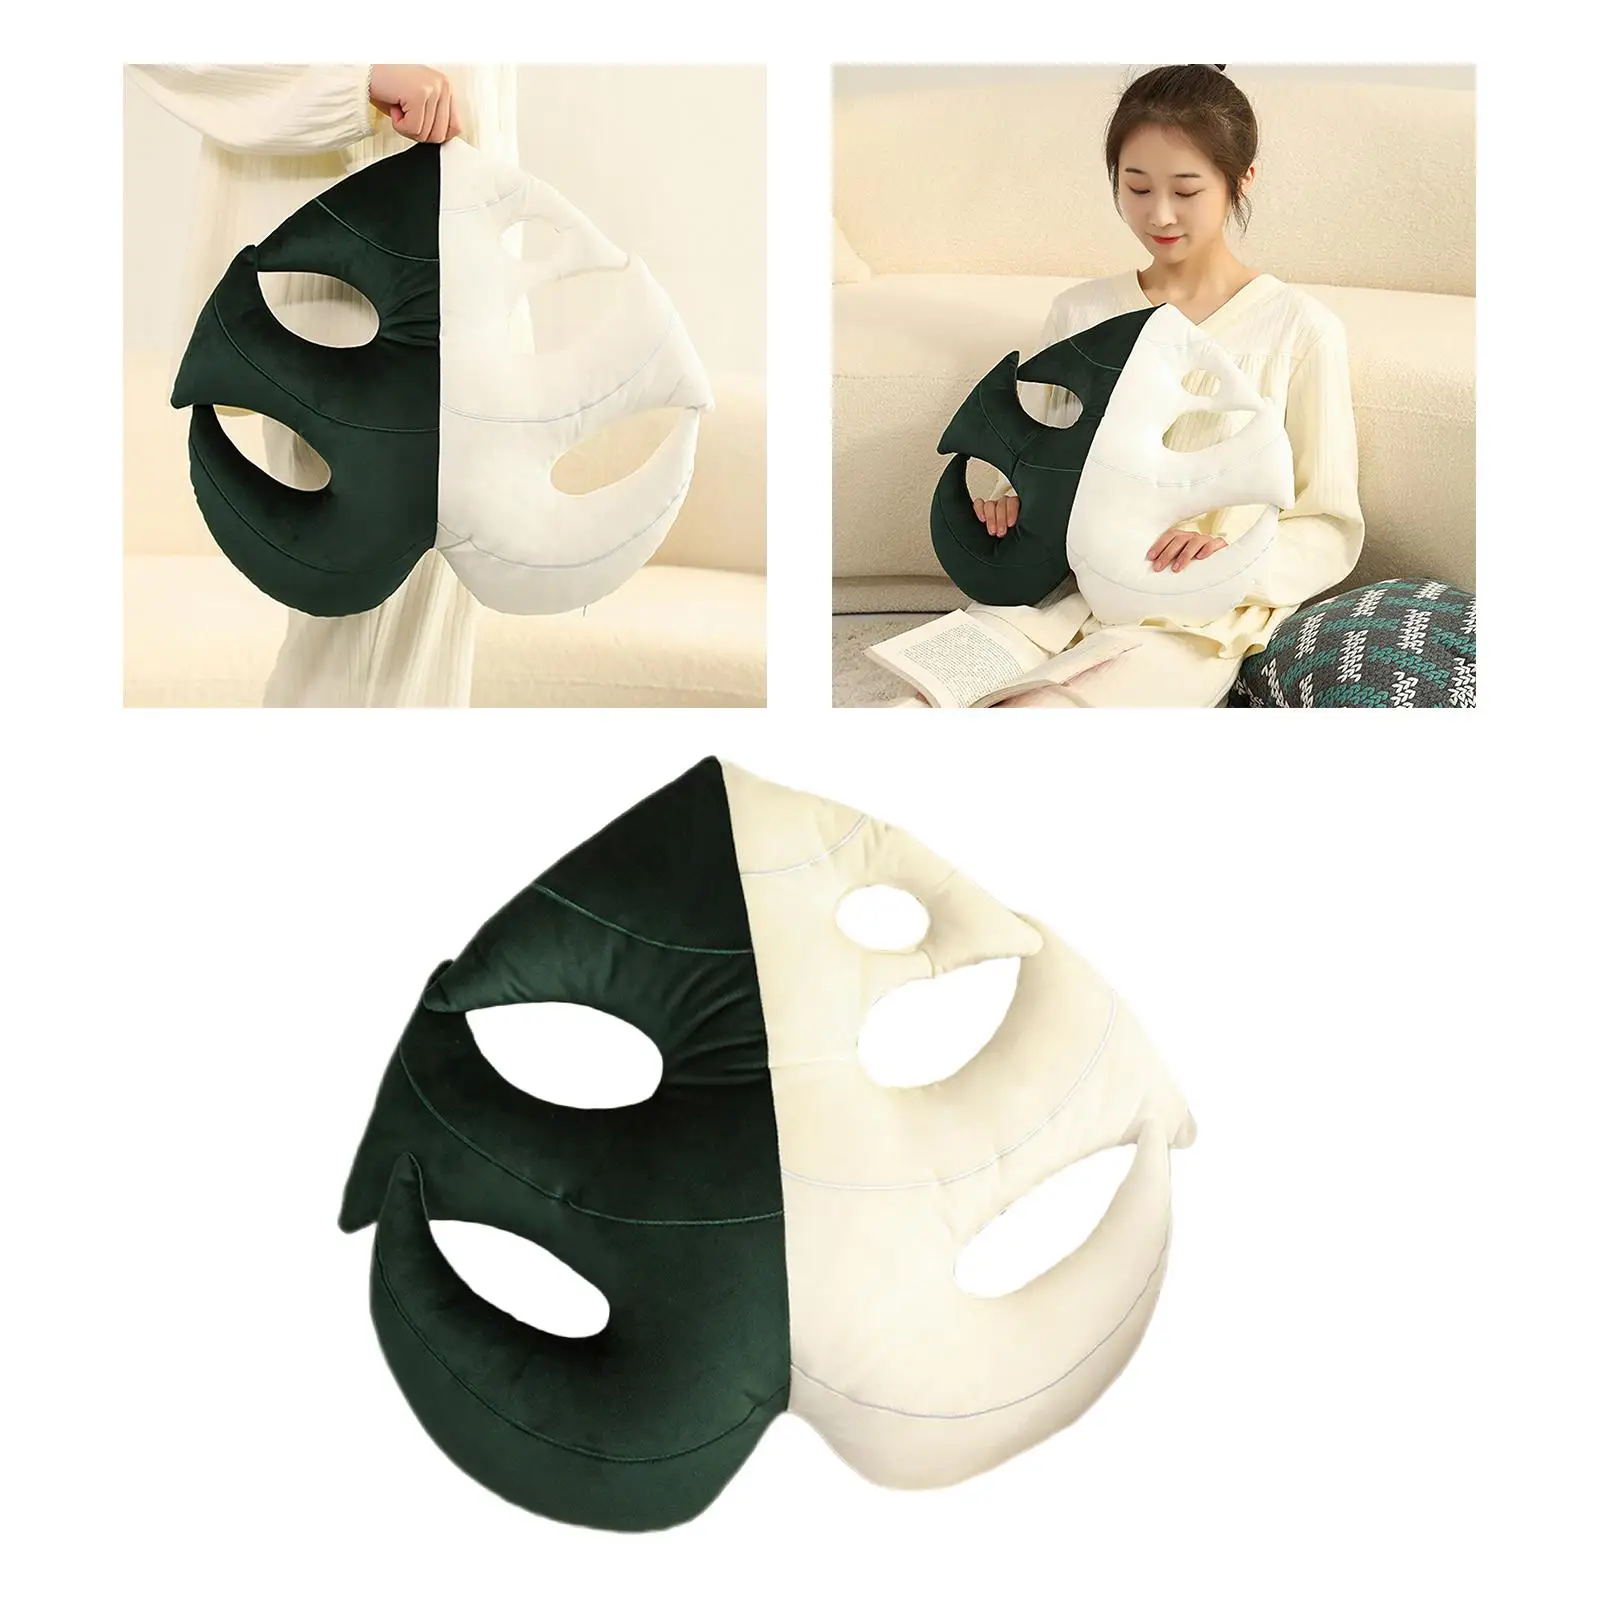  Leaf Shaped Throw  Filled Plant Leaves Plush Decorative Cushion  for Sofa Couch Car Bed Home Decor